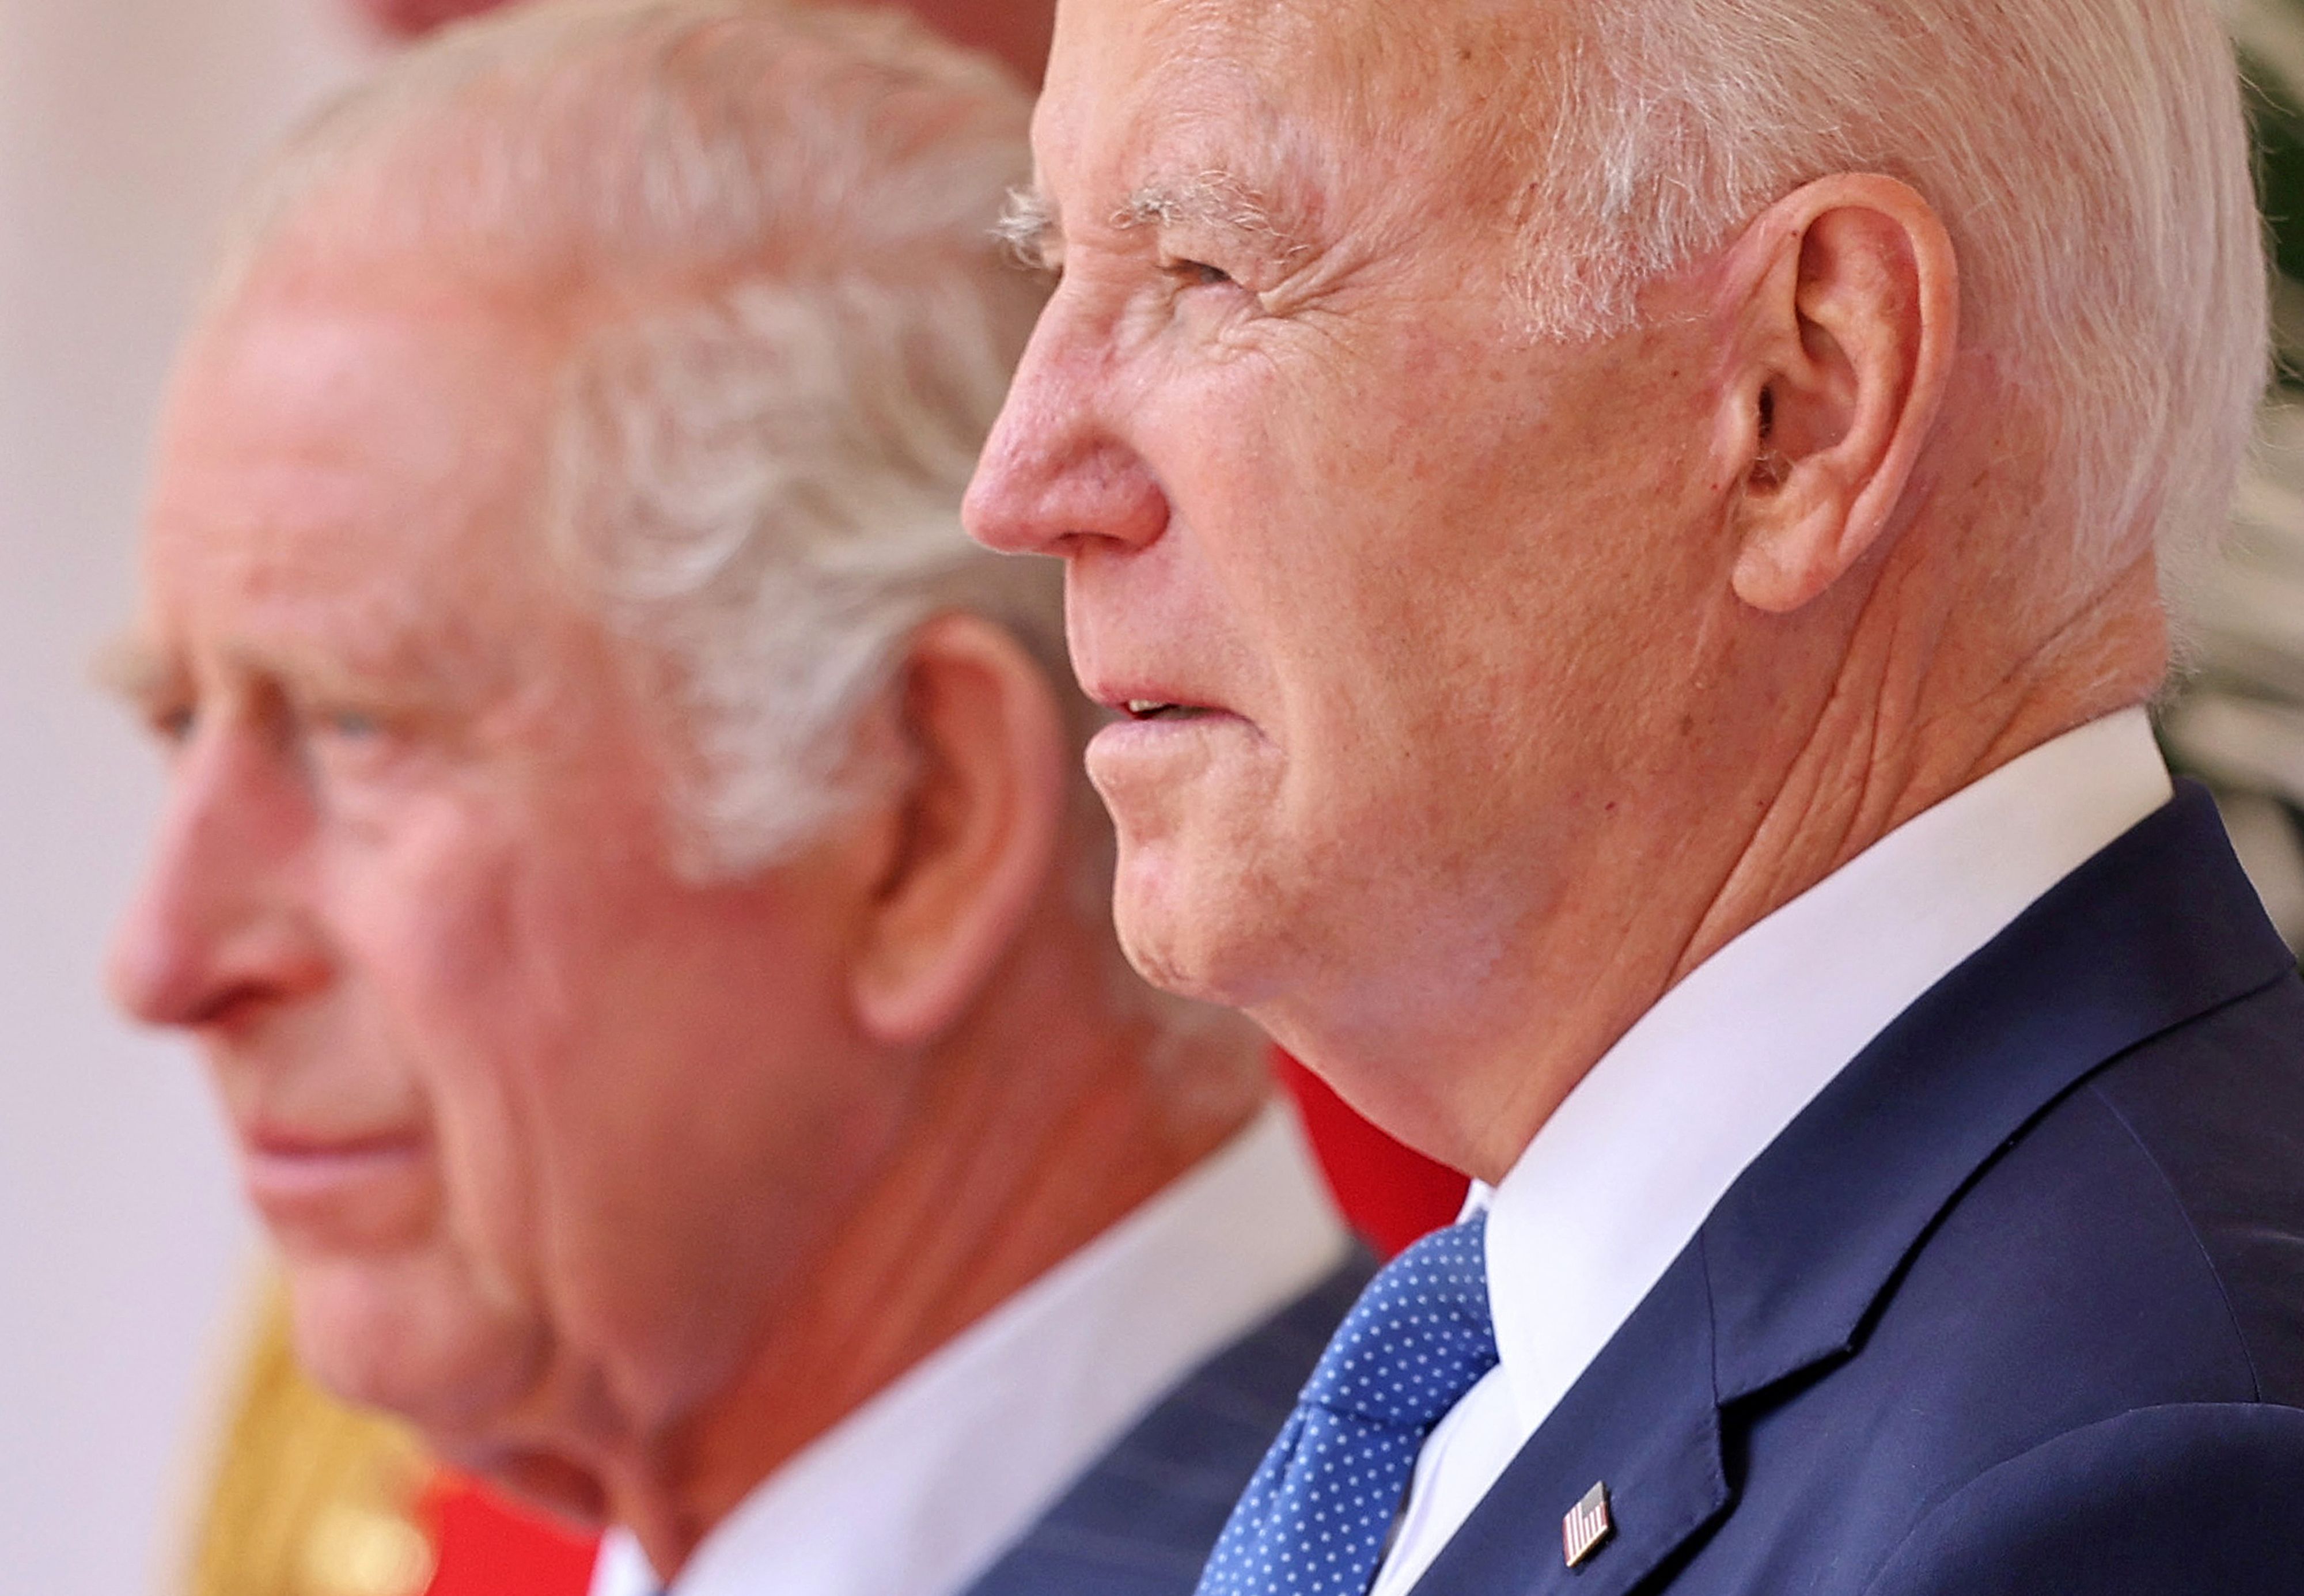 <p>King Charles III and President Joe Biden watched a military march during a ceremonial <a href="https://www.wonderwall.com/celebrity/royals/see-king-charles-iii-meetings-with-american-u-s-presidents-over-the-years-prince-charles-camilla-652116.gallery">welcome for the American leader</a> in the Quadrangle at Windsor Castle in Windsor, England, on July 10, 2023. The president visited Britain to further strengthen the close relationship between the nations and to discuss climate issues with the monarch. He also met with Prime Minister Rishi Sunak before going on to a NATO summit in Lithuania.</p>